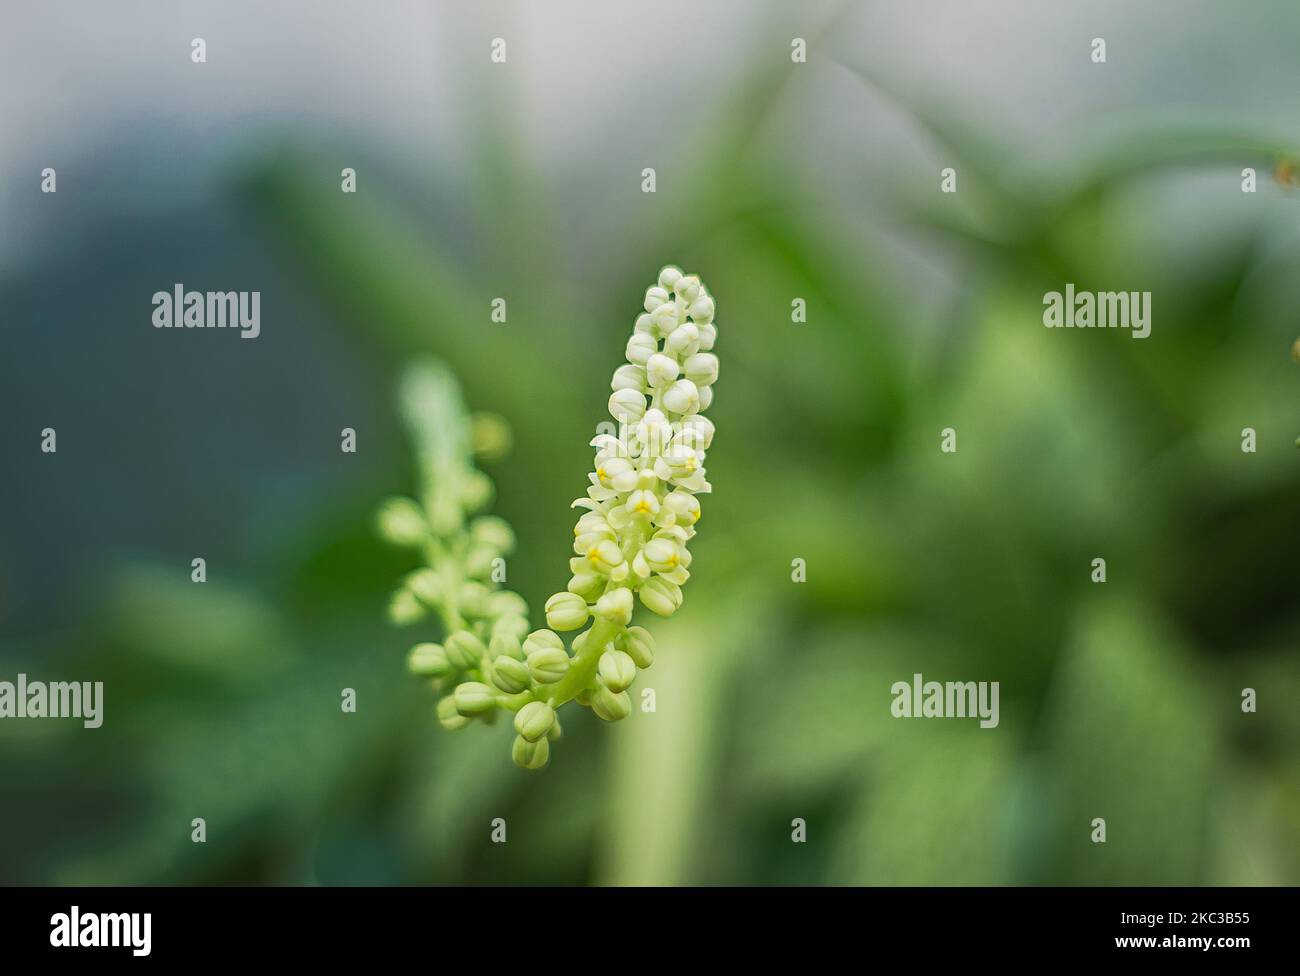 The flower of the Drimiopsis Kirkii plant isolated on the blurred natural backgorund, close-up Stock Photo